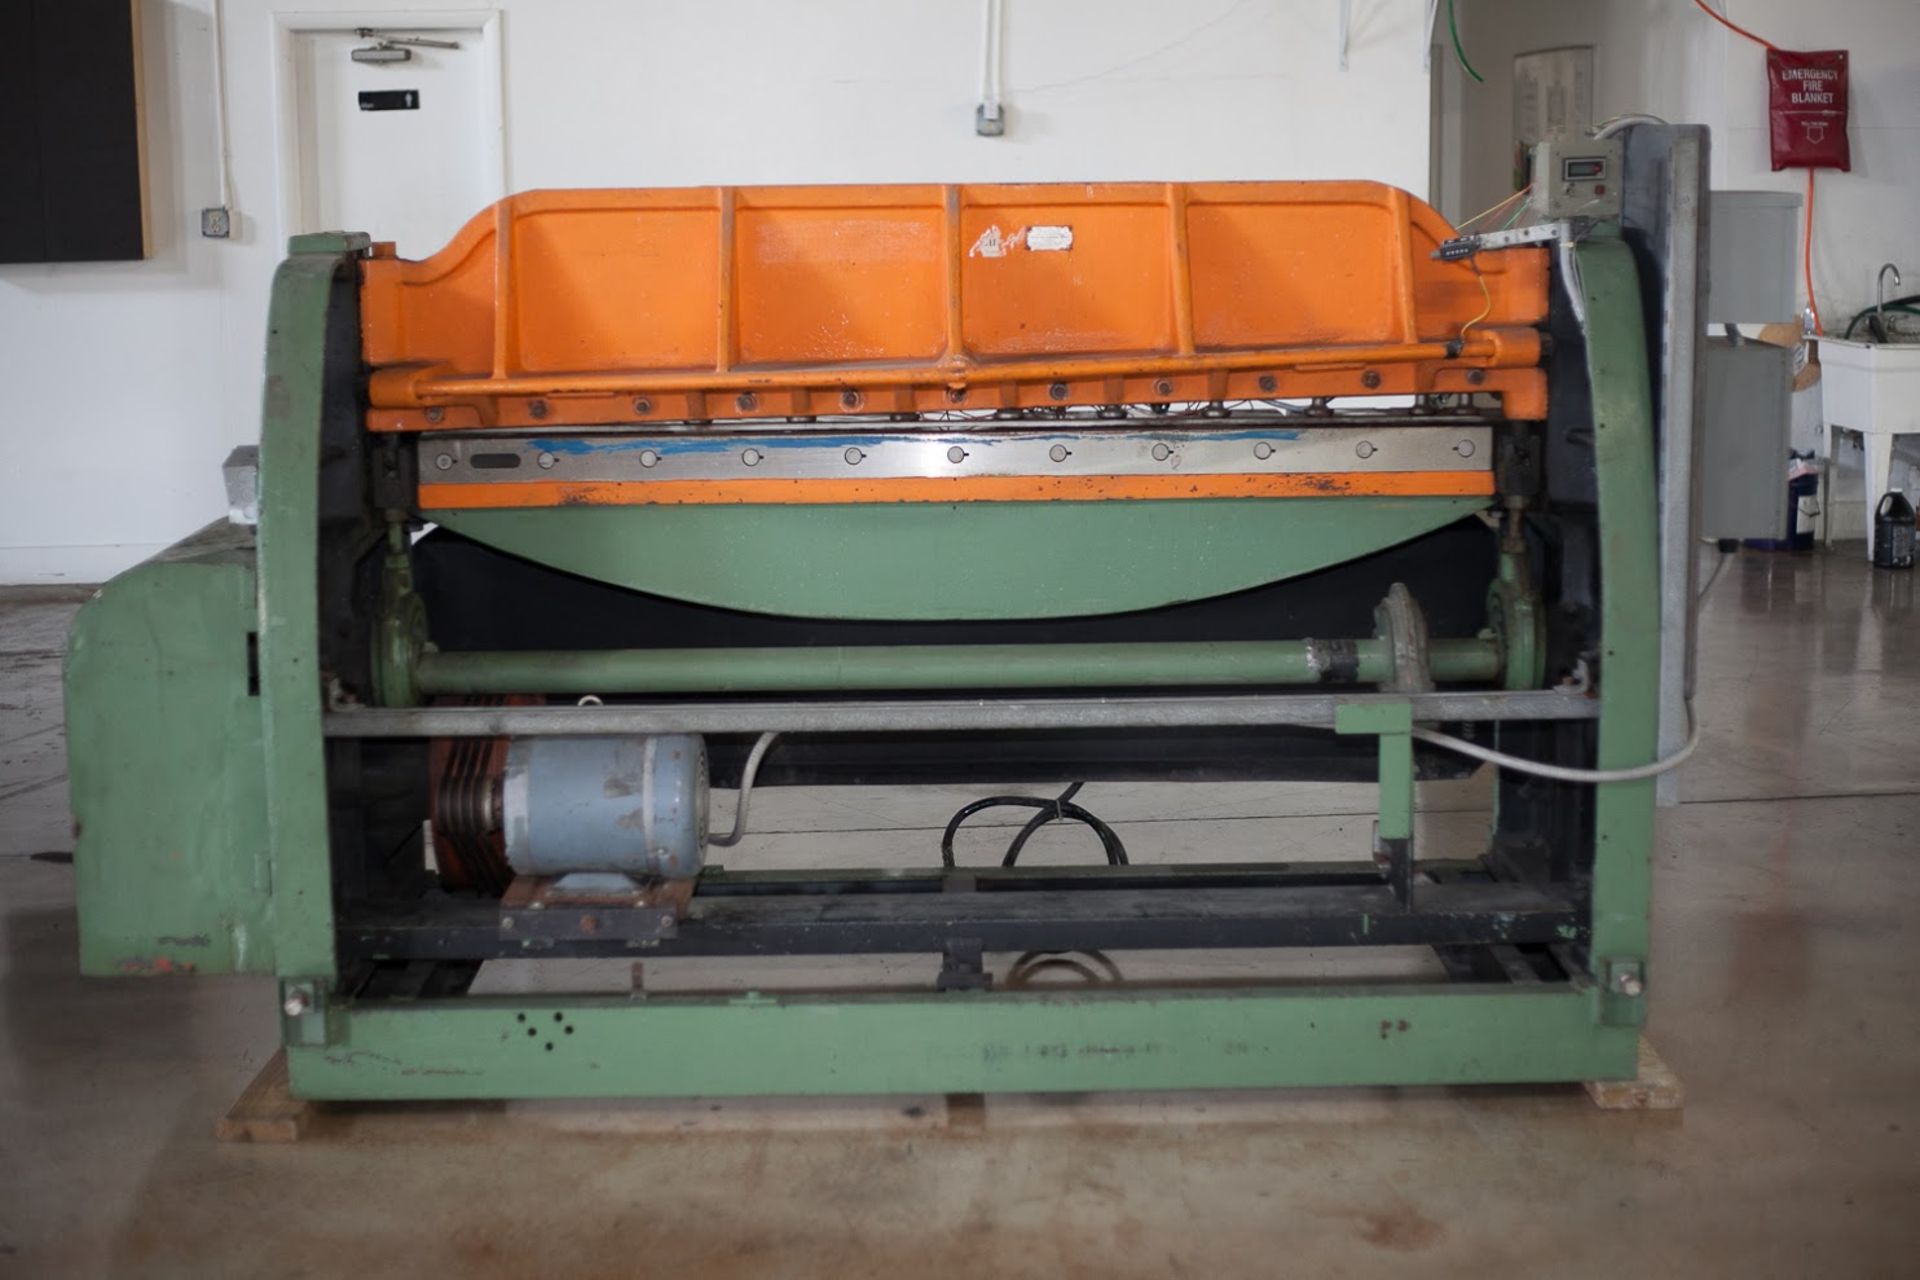 Peck Stow and Wilcos 14 GA Capacity Shear, Model 14-U6C, S/N 611054, Extra New Shear Knife - Image 3 of 8